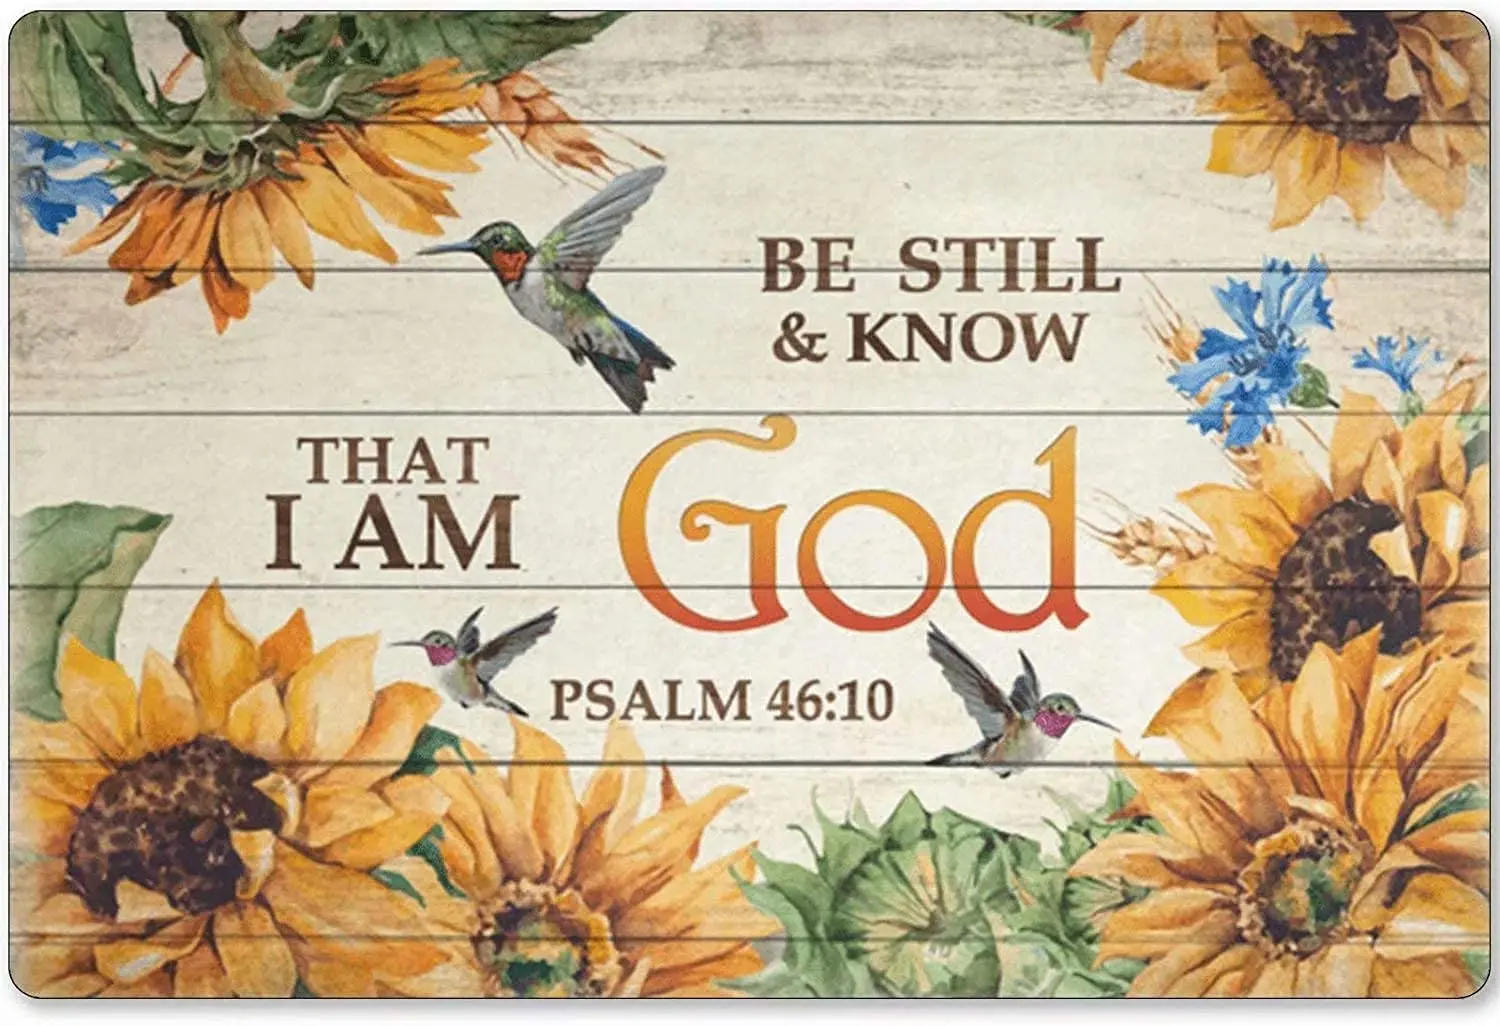 

good luckcy Metal Sign Vintage Wall Decor Sunflower and Bird Be Still & Know That I Am God Metal Tin Sign Poster 12x16 Inches